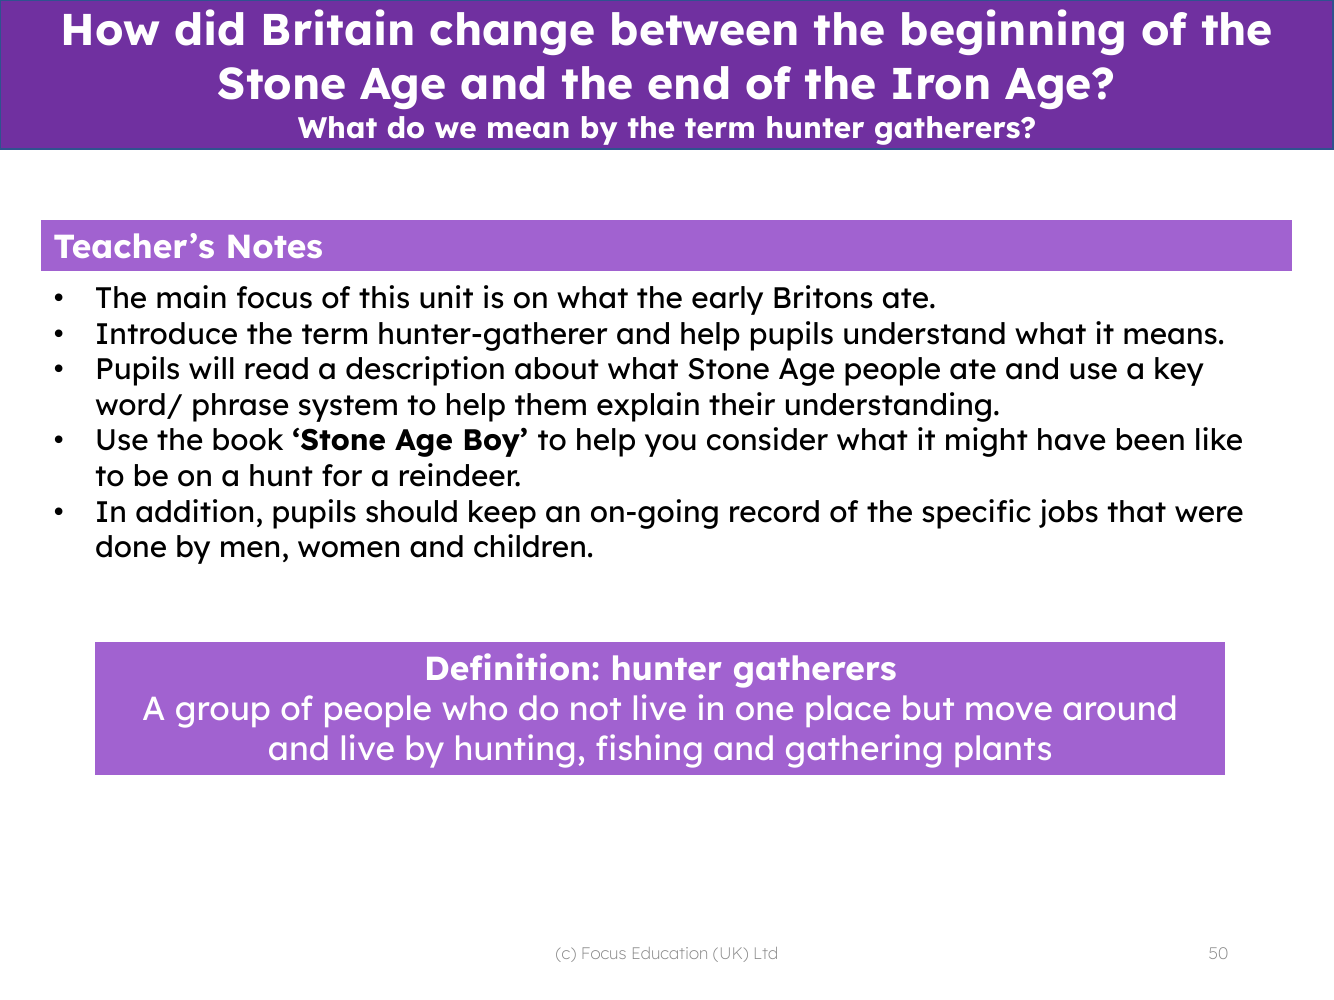 What do we mean by the term 'hunter gatherer'? - Teacher notes